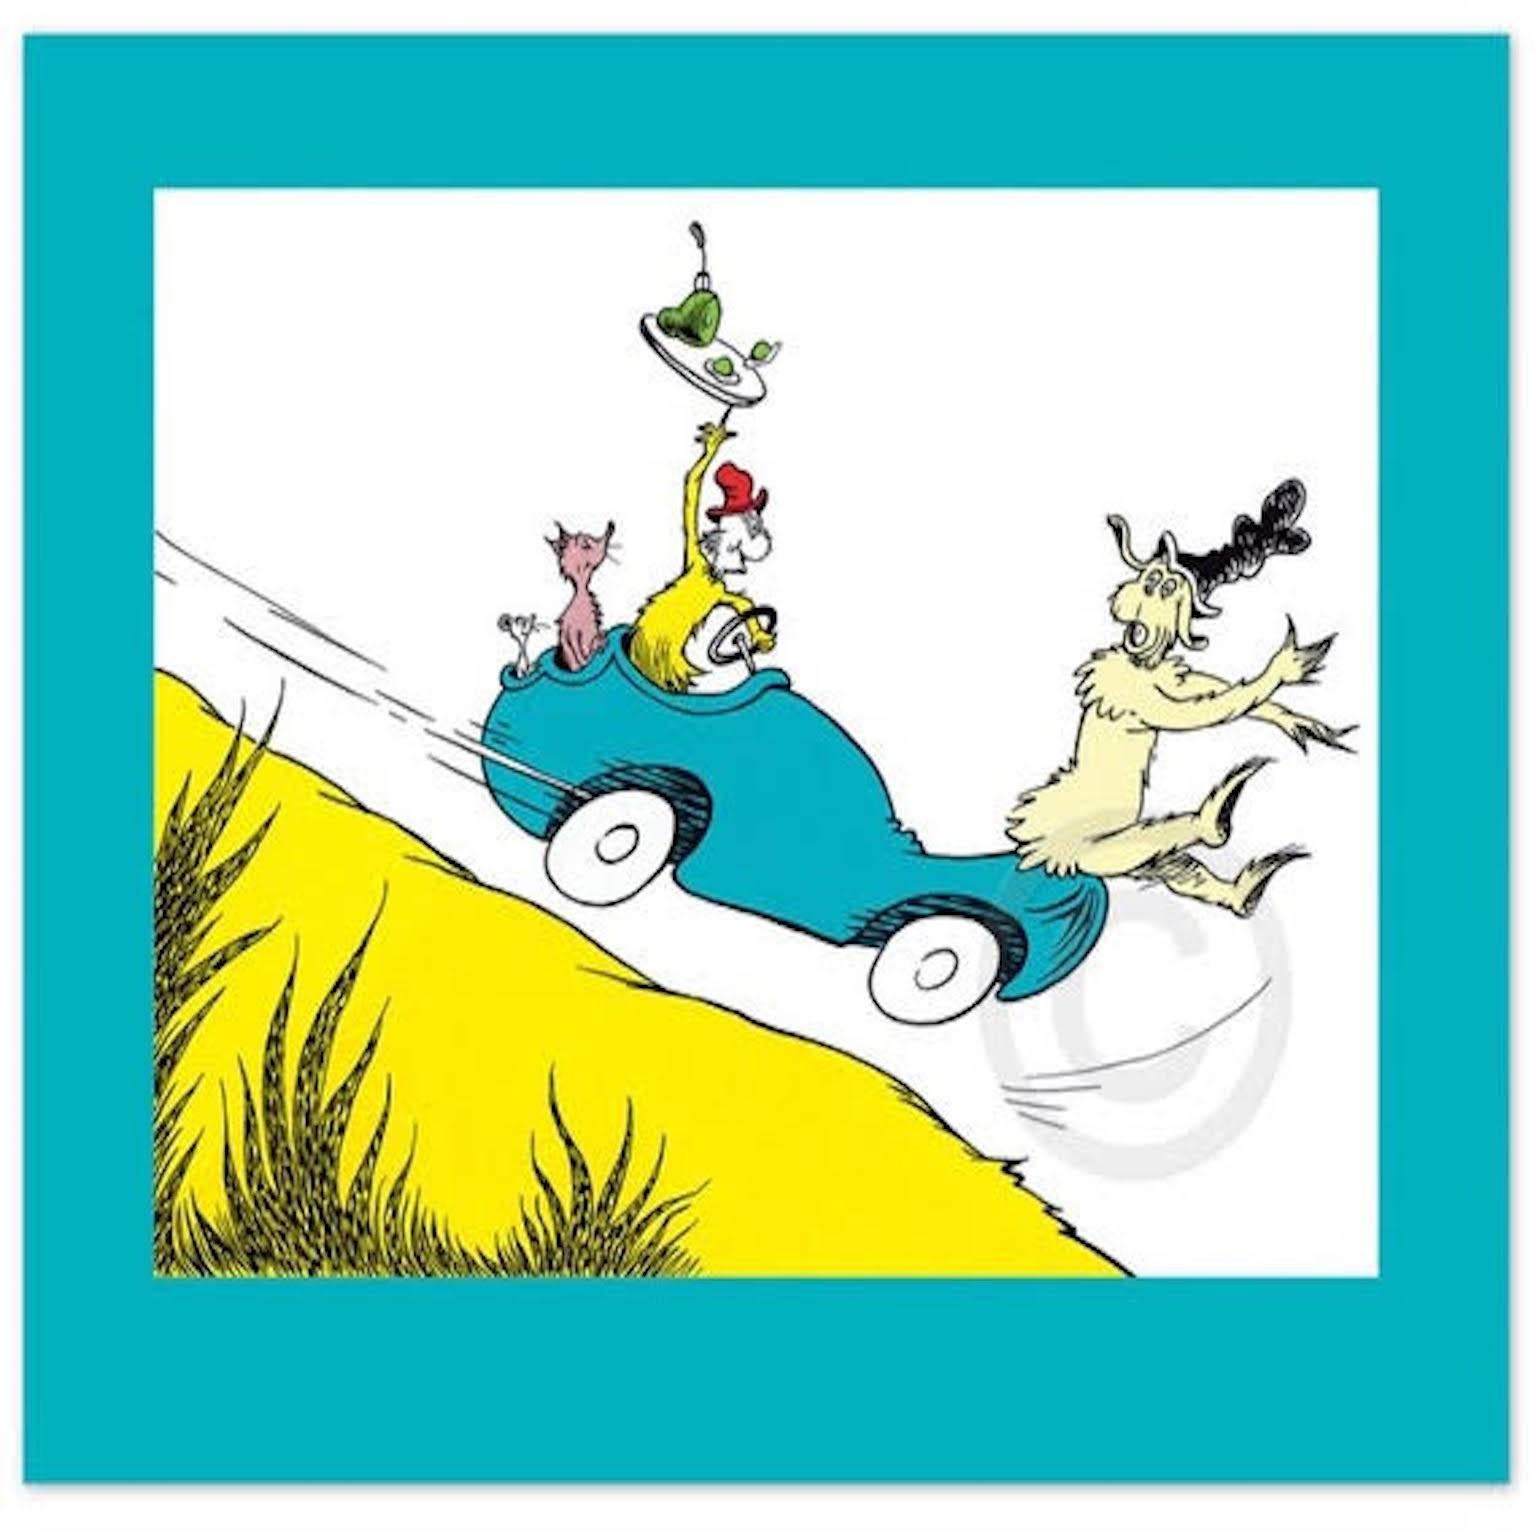 Dr. Seuss, Would You? Could You? In a Car? - Art by Dr. Seuss (Theodore Geisel)